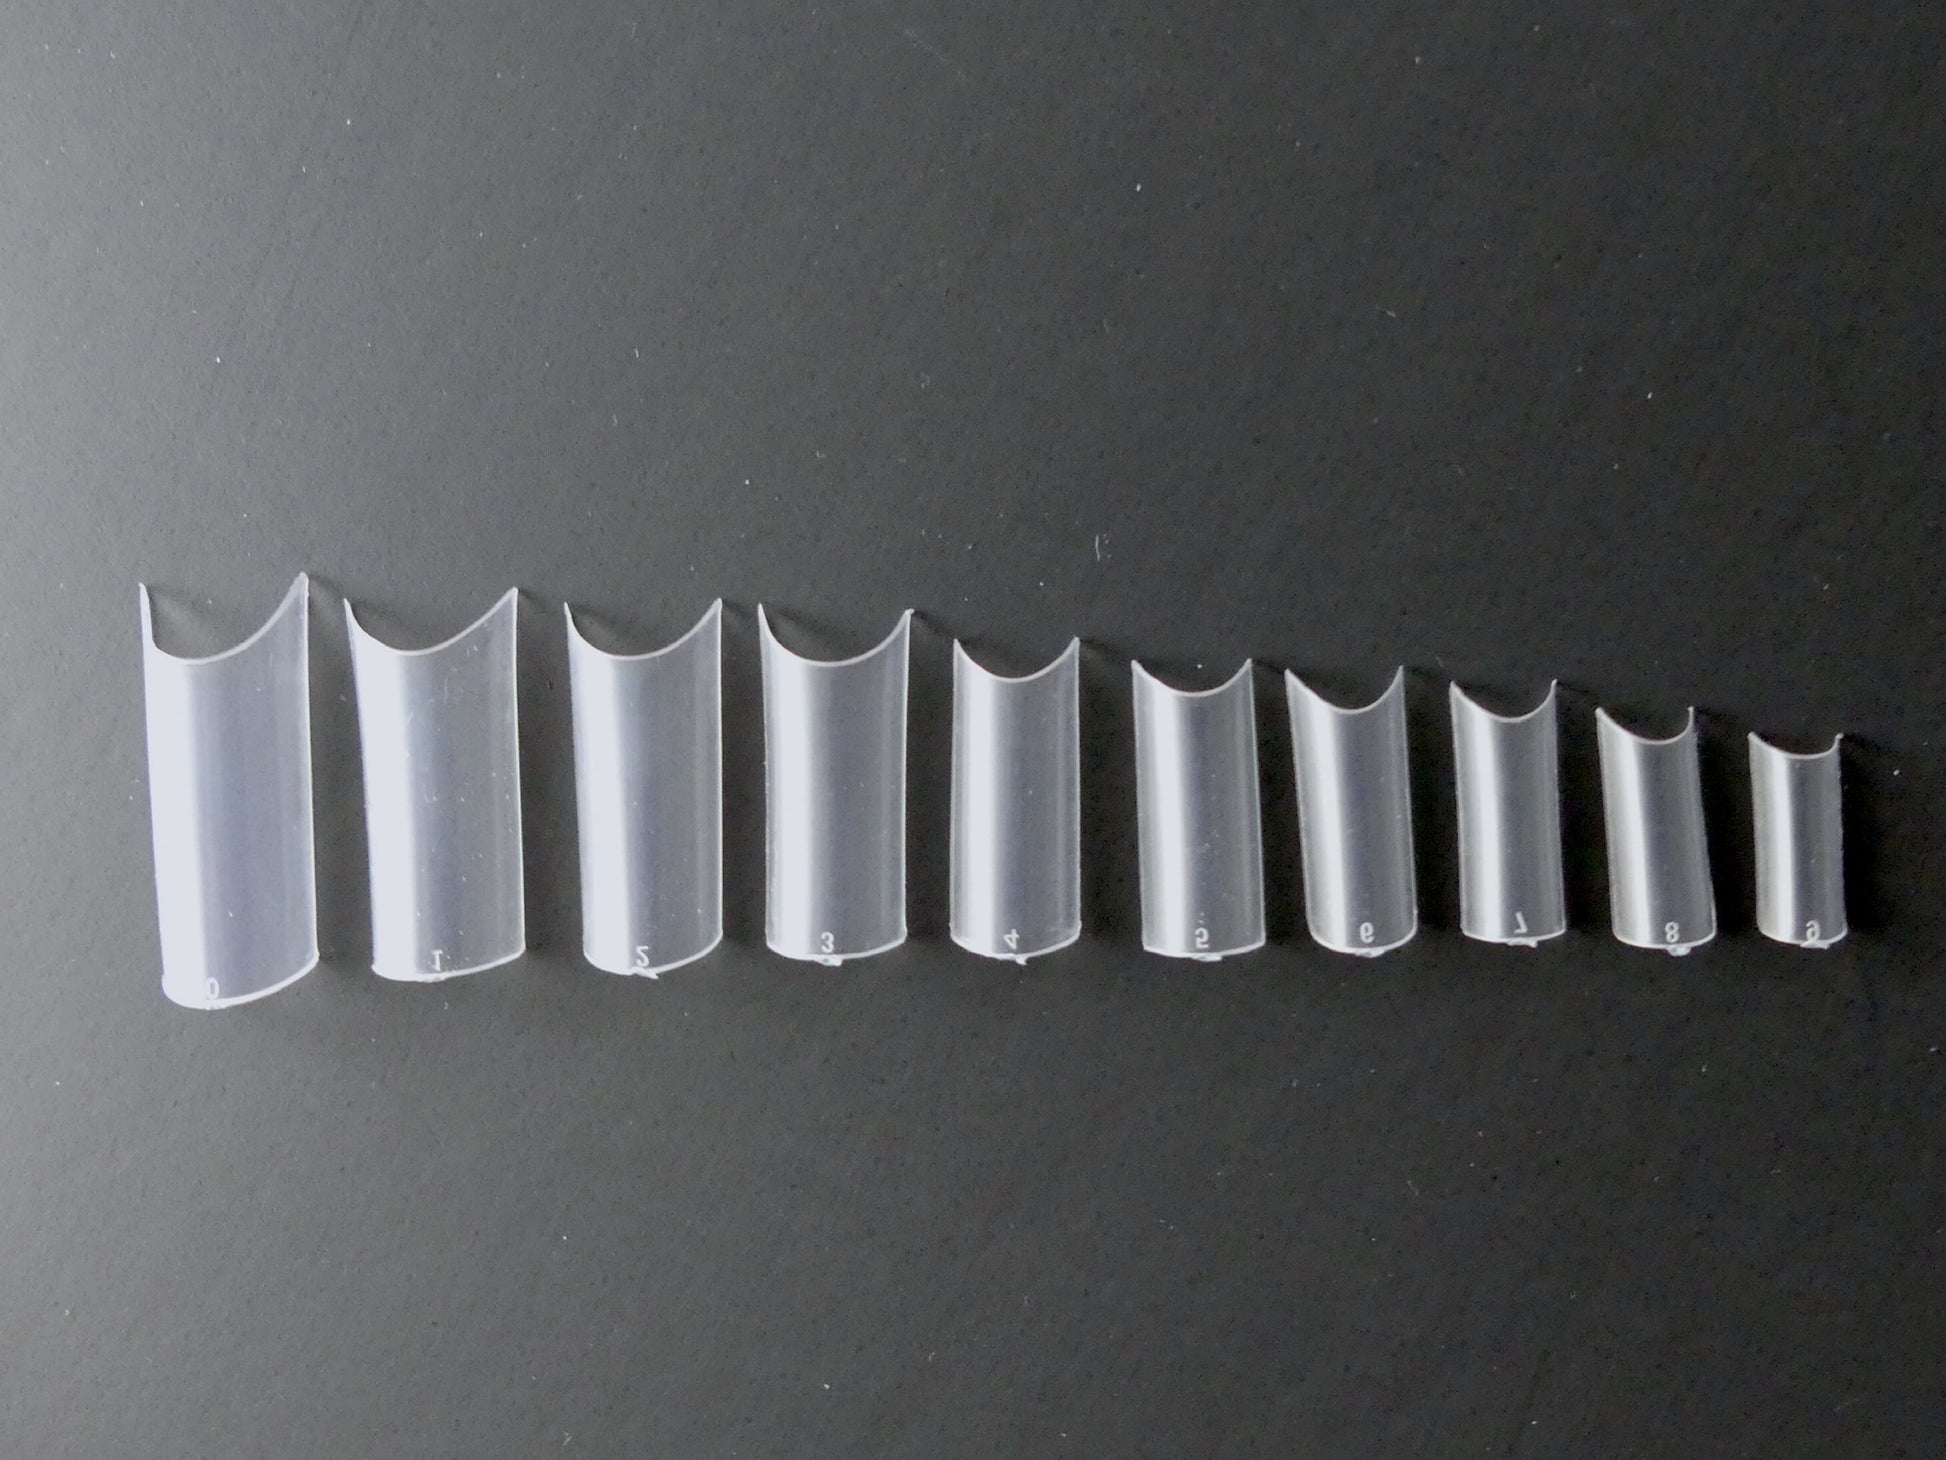 Charisma Nail C-Curve Square Clear Tips, 500ct / 10 sizes - My Little Nail Art Shop